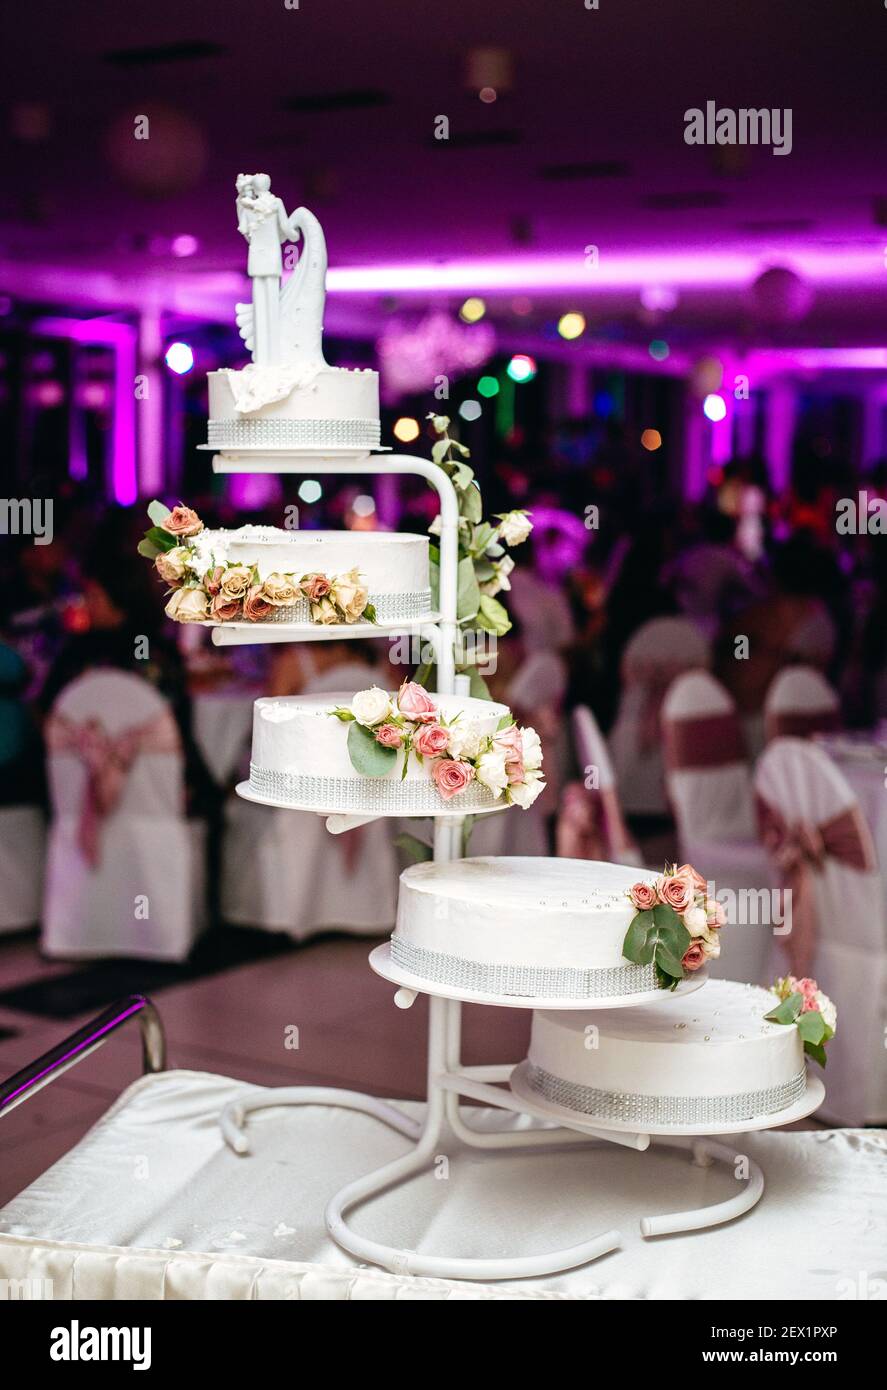 Unique Wedding Cake Trends | Gallery posted by Claire Berthold | Lemon8